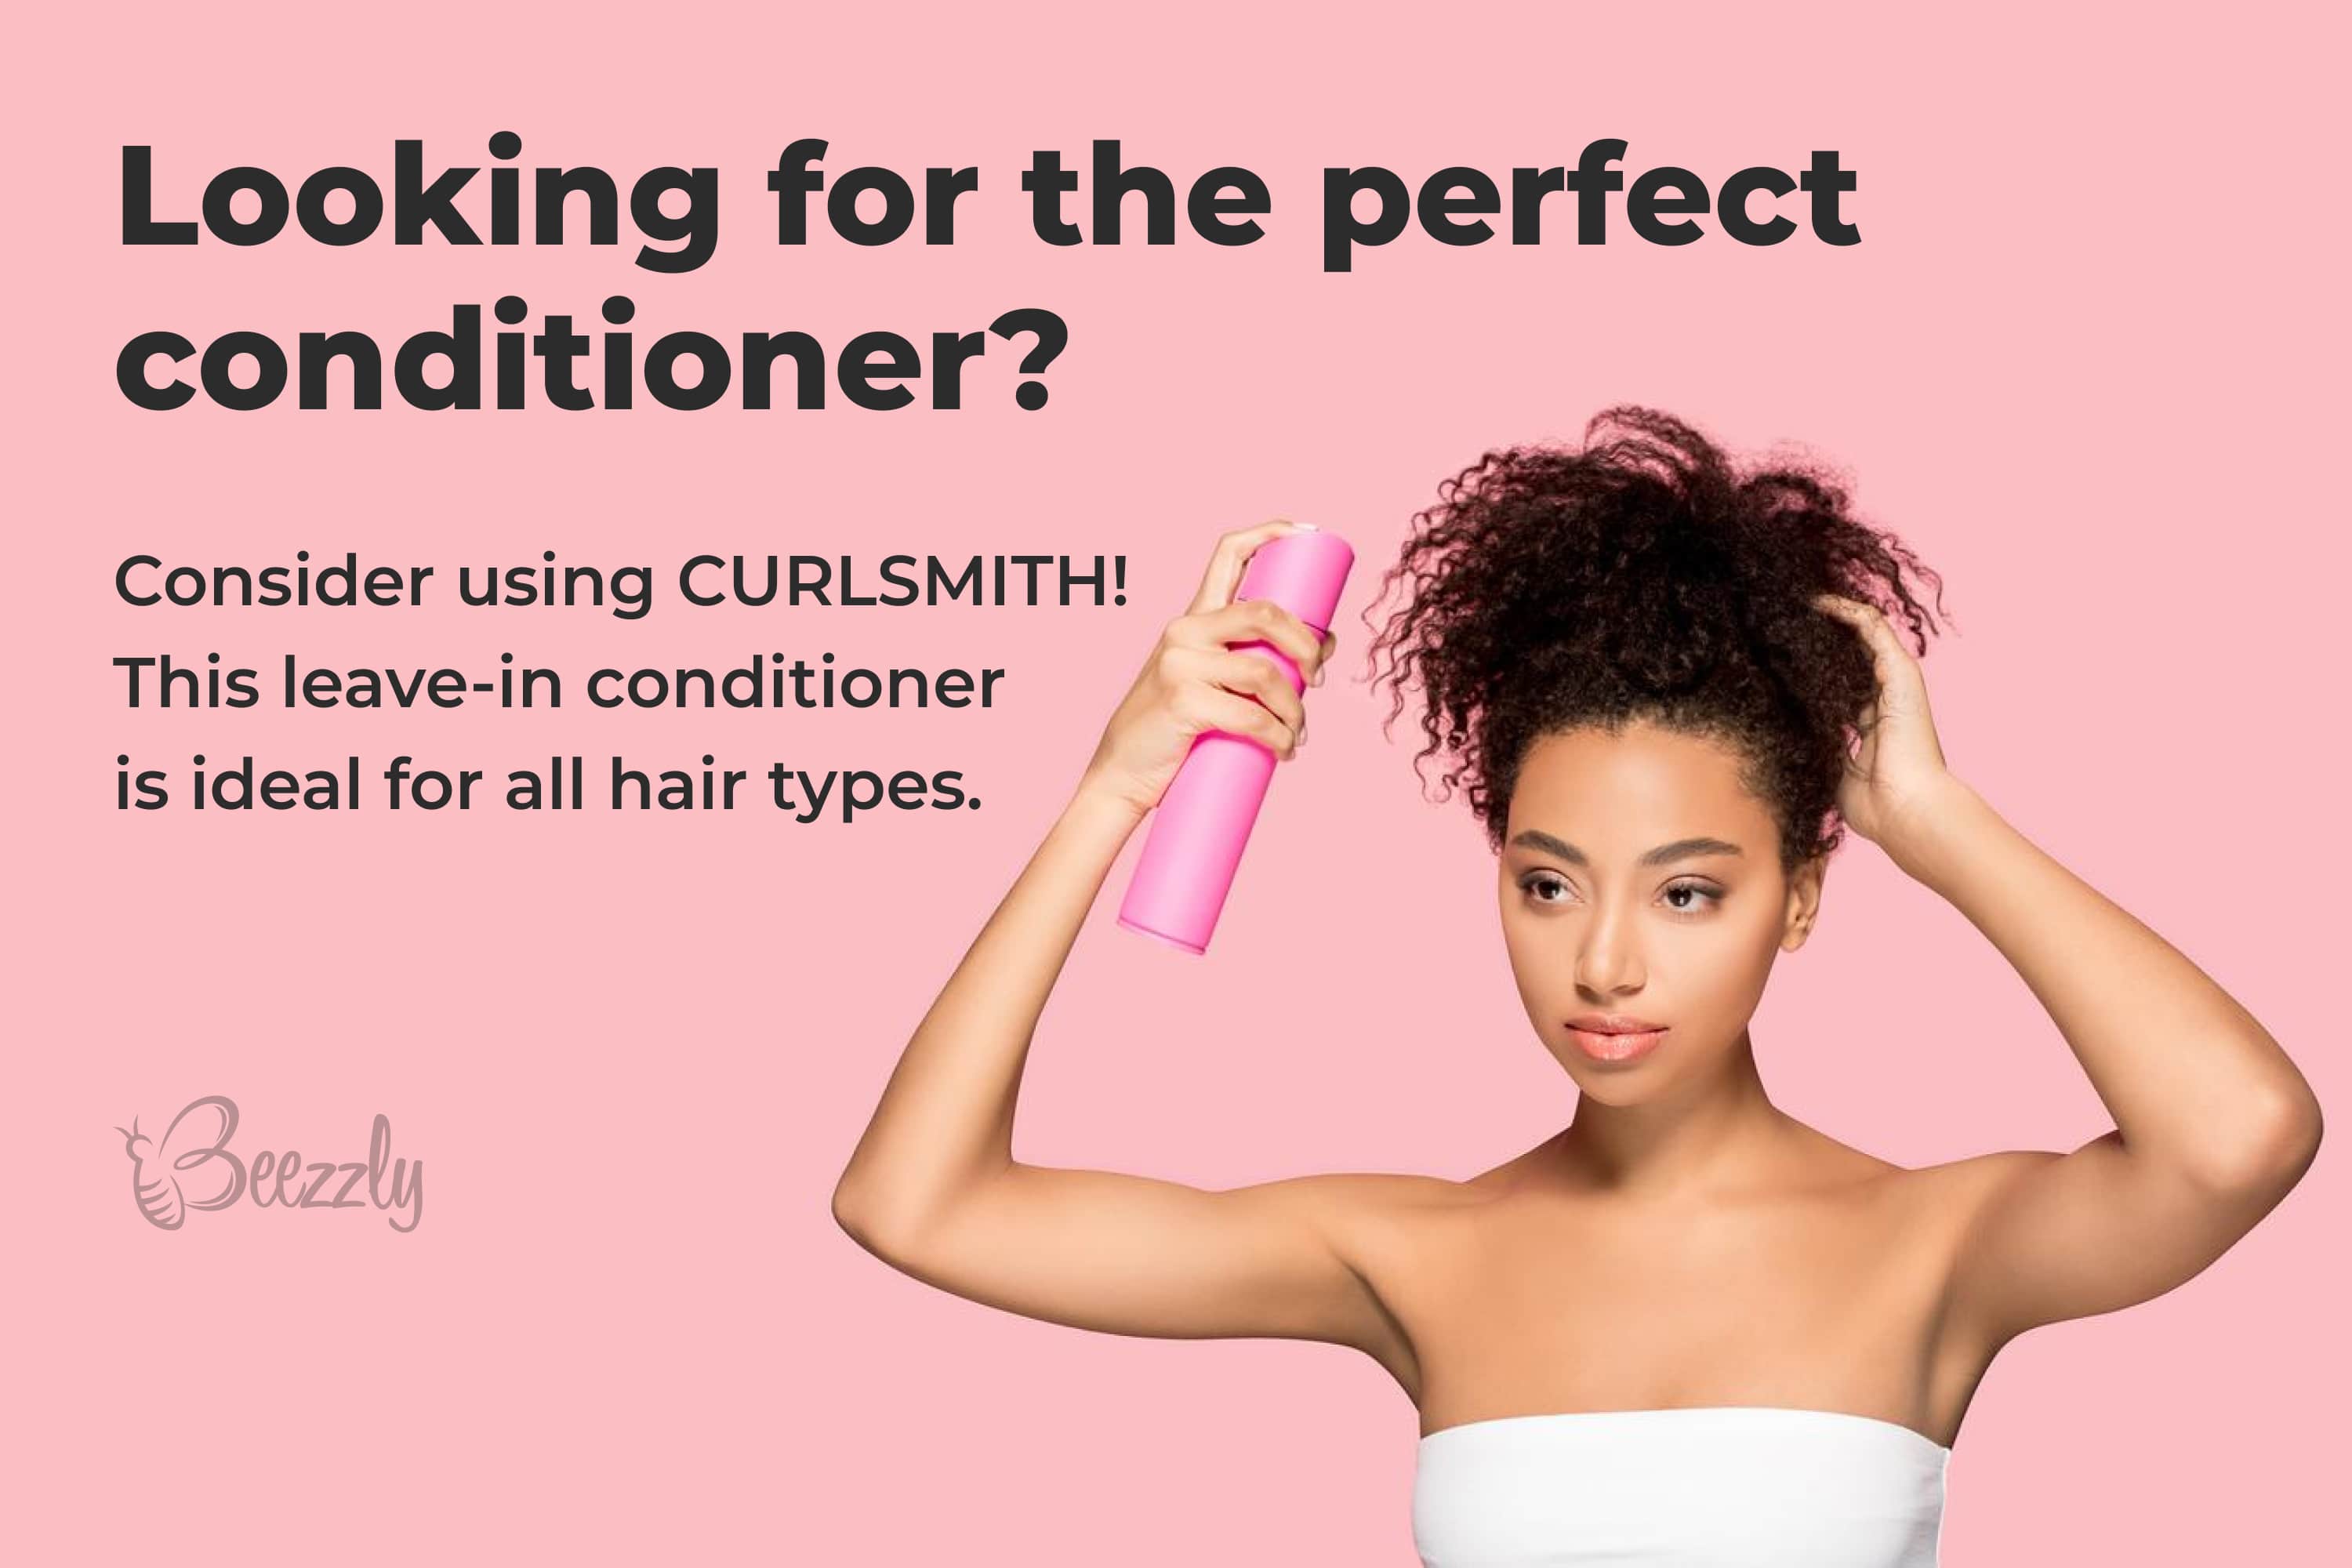 Looking for the perfect conditioner